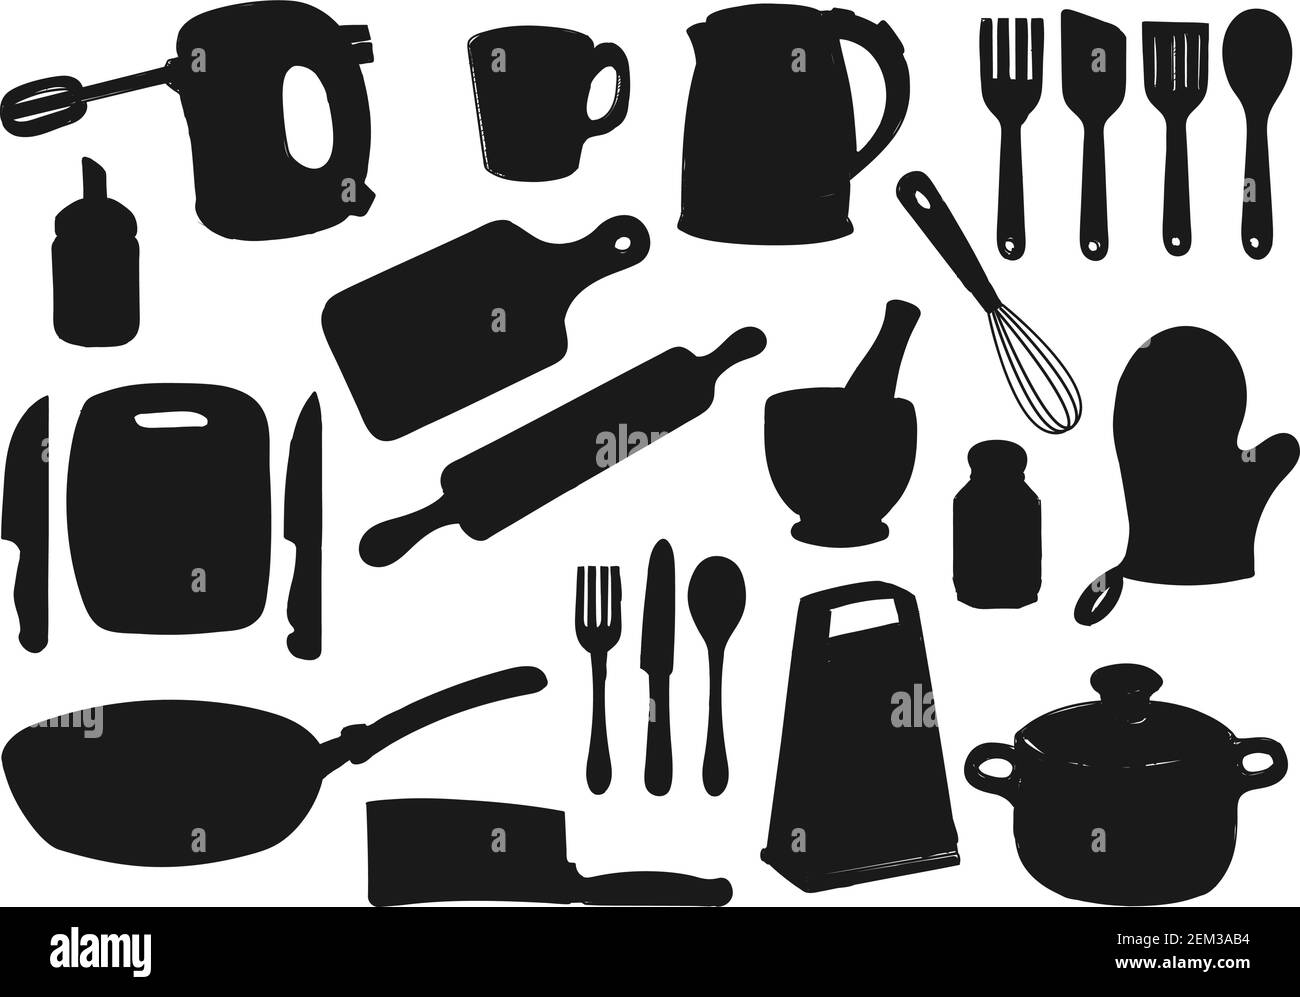 https://c8.alamy.com/comp/2EM3AB4/kitchenware-kitchen-utensil-isolated-black-silhouettes-vector-cutlery-and-kitchen-appliance-cooking-pots-and-knives-spatula-and-cutting-board-ele-2EM3AB4.jpg